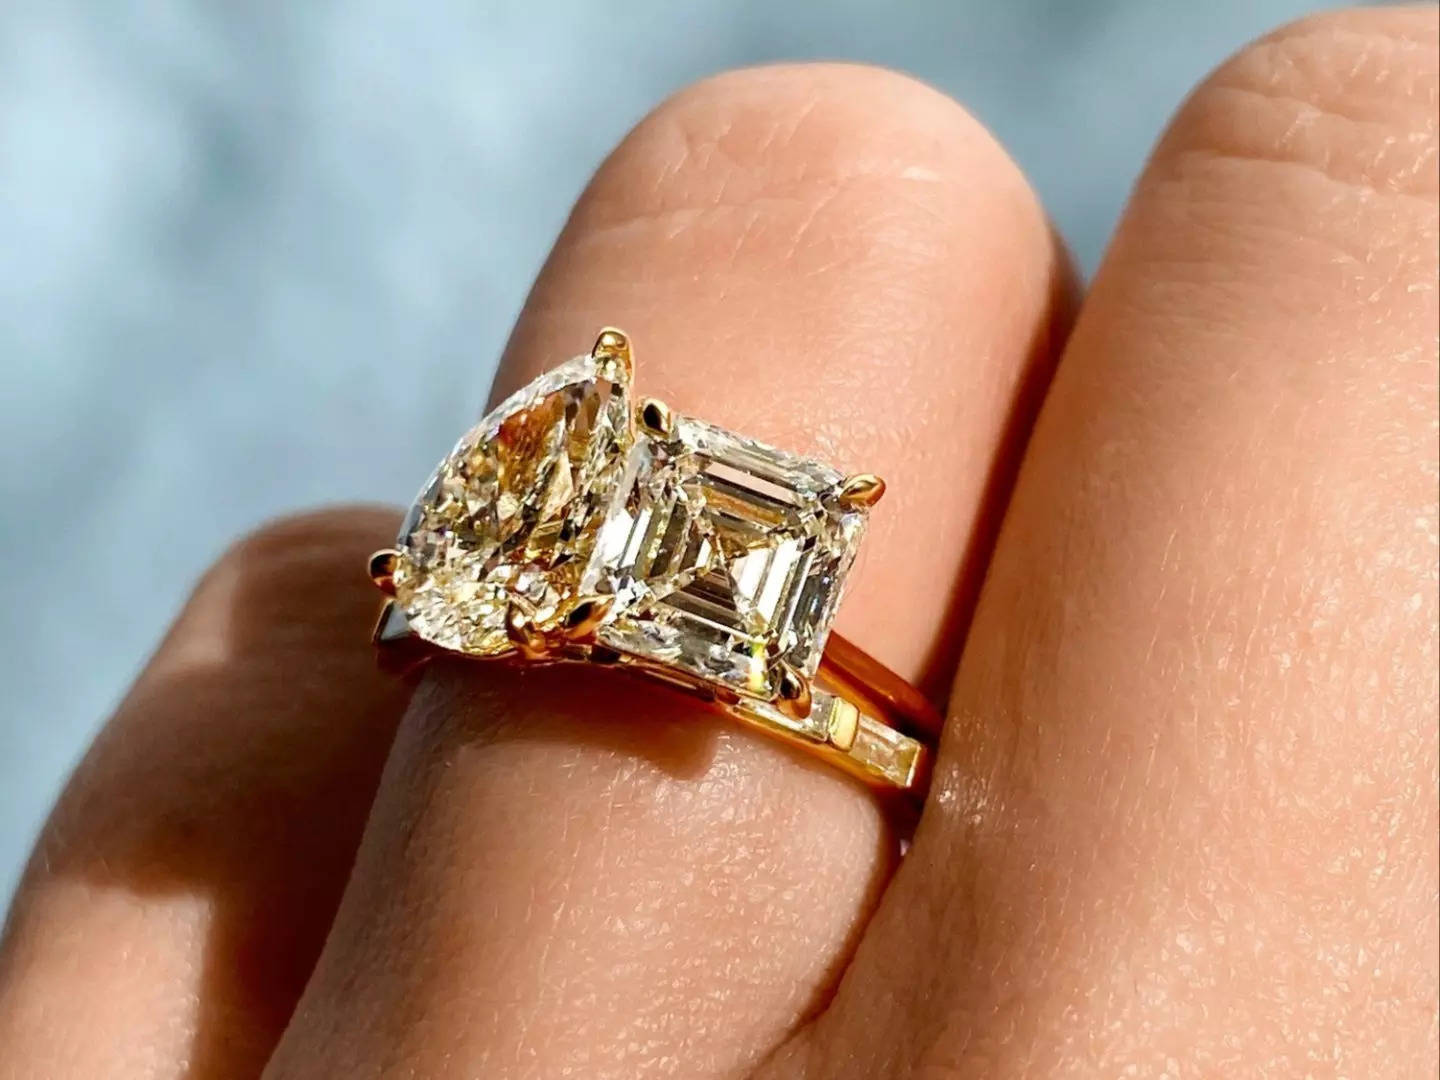 11 Instagram Accounts to Follow for Engagement Ring Inspo